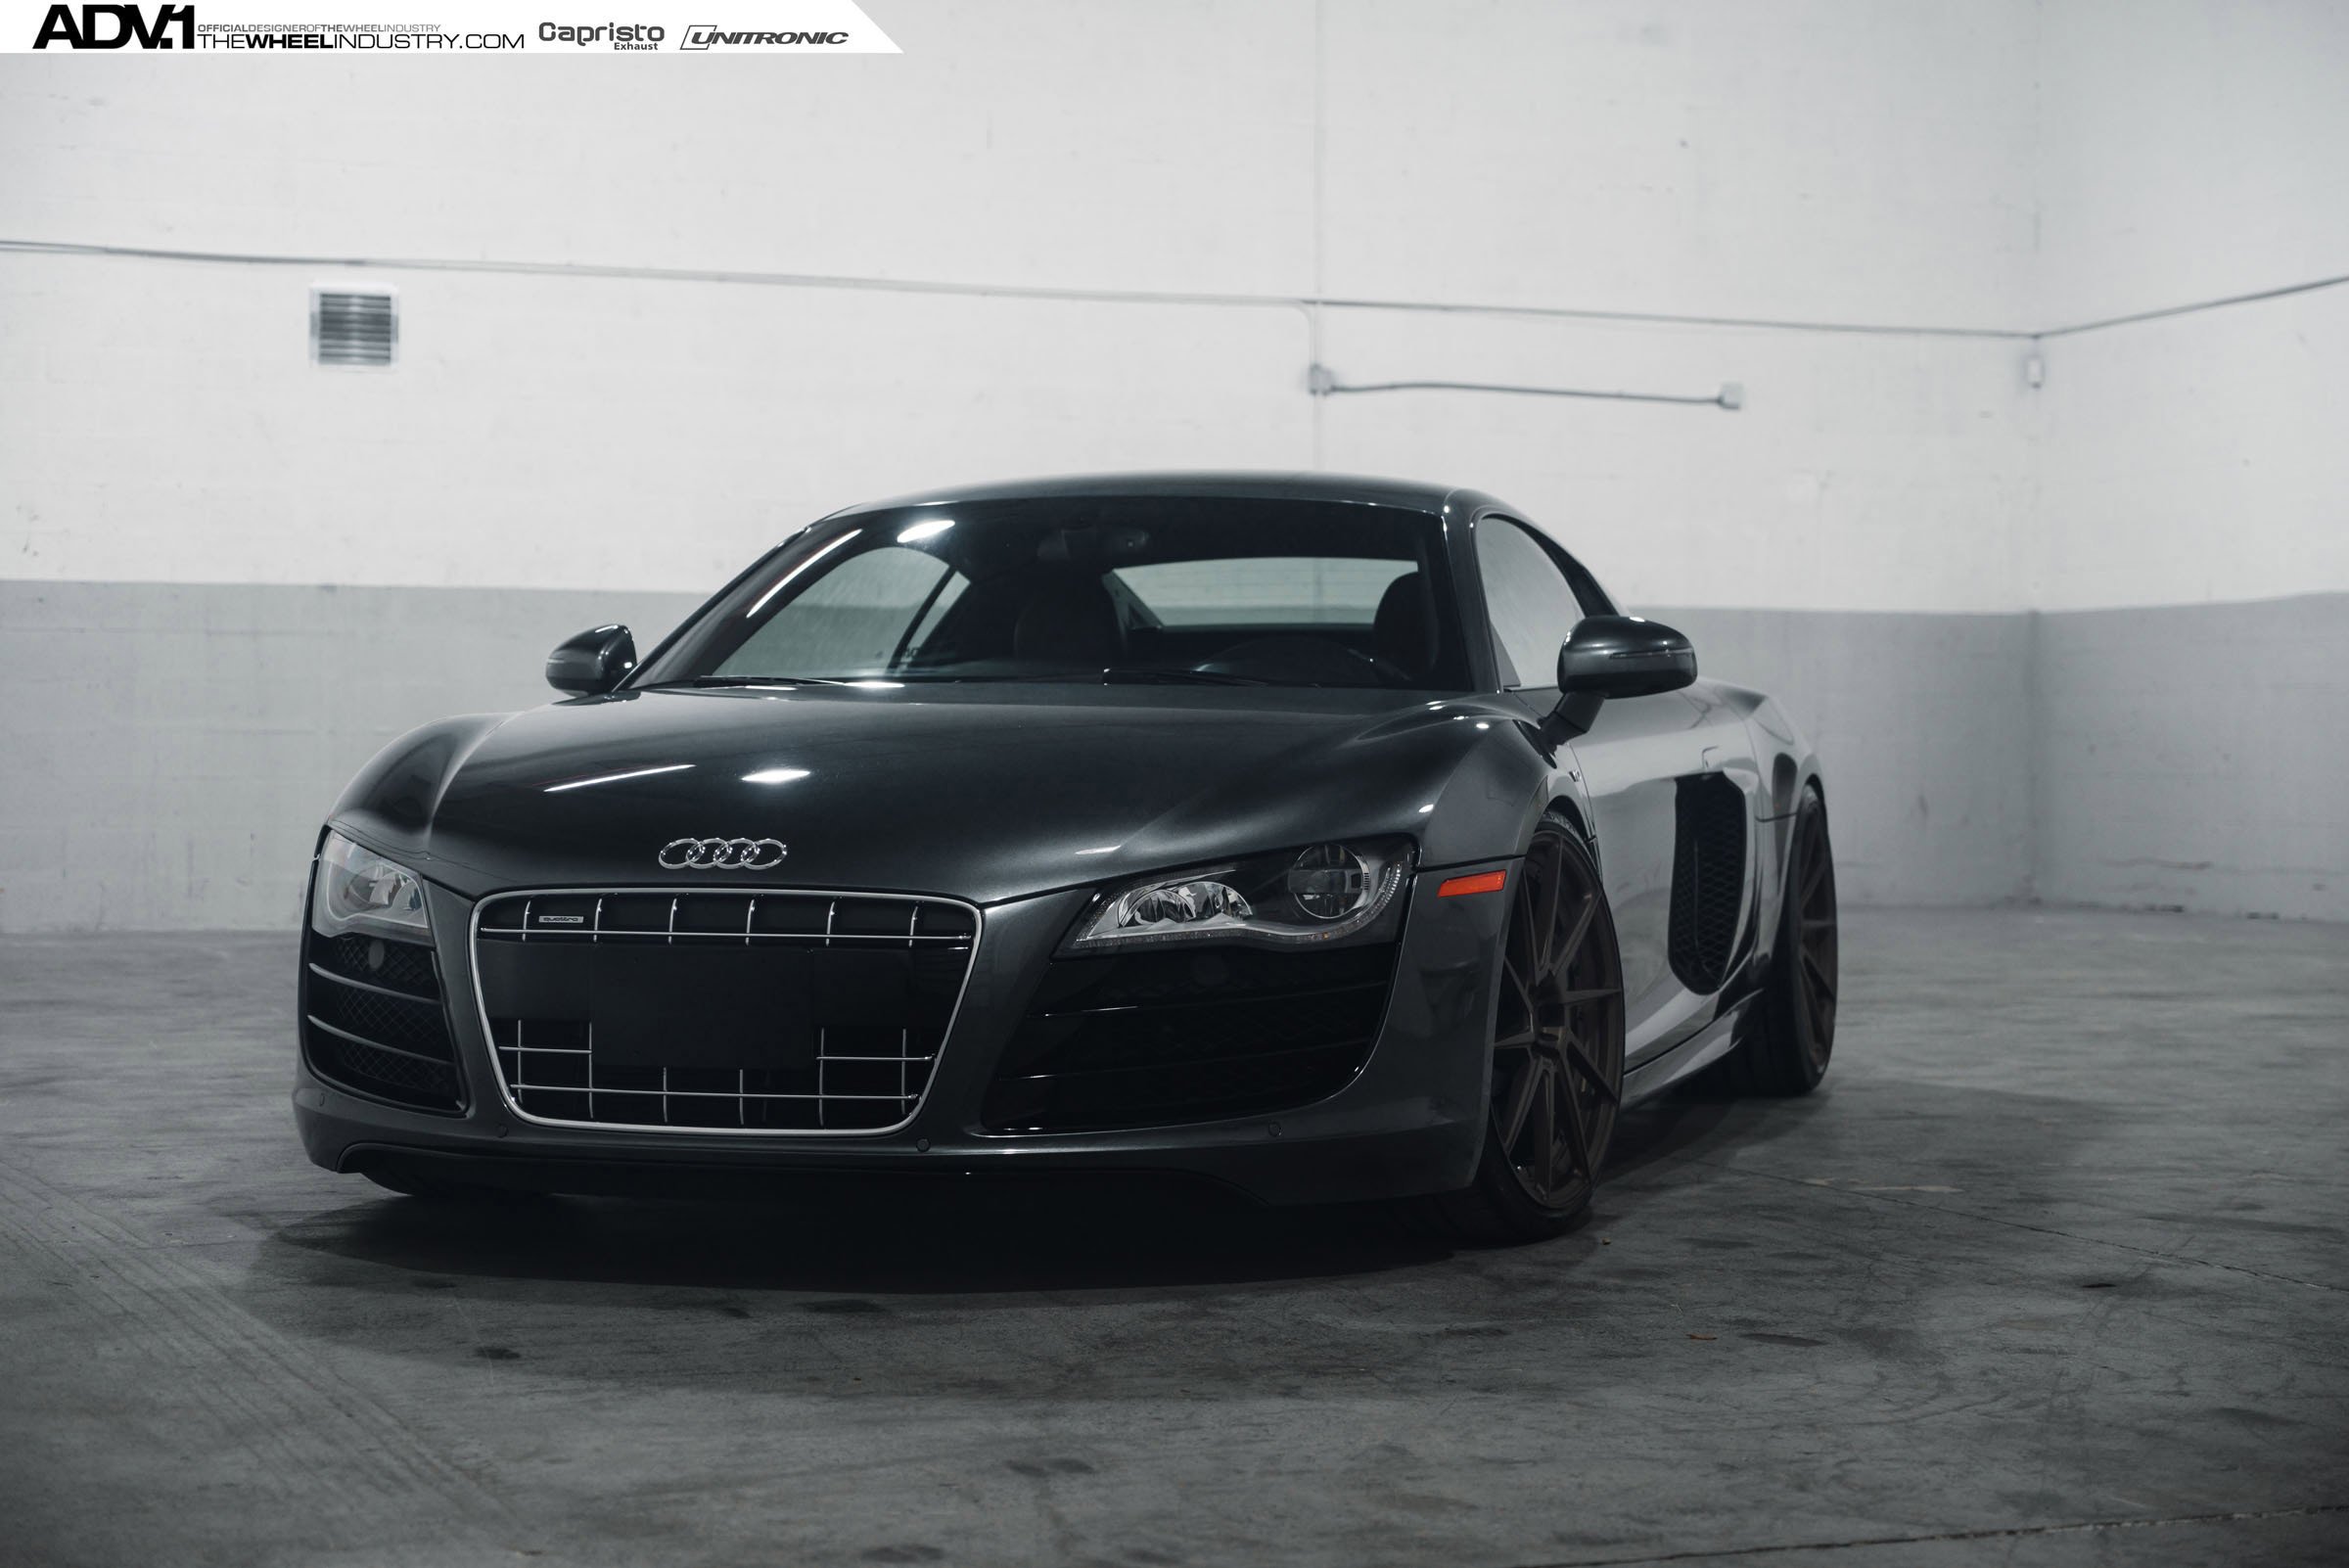 adv, 1, Wheels, Gallery, Audi r8, Coupe, Cars, Supercars, Tuning Wallpaper